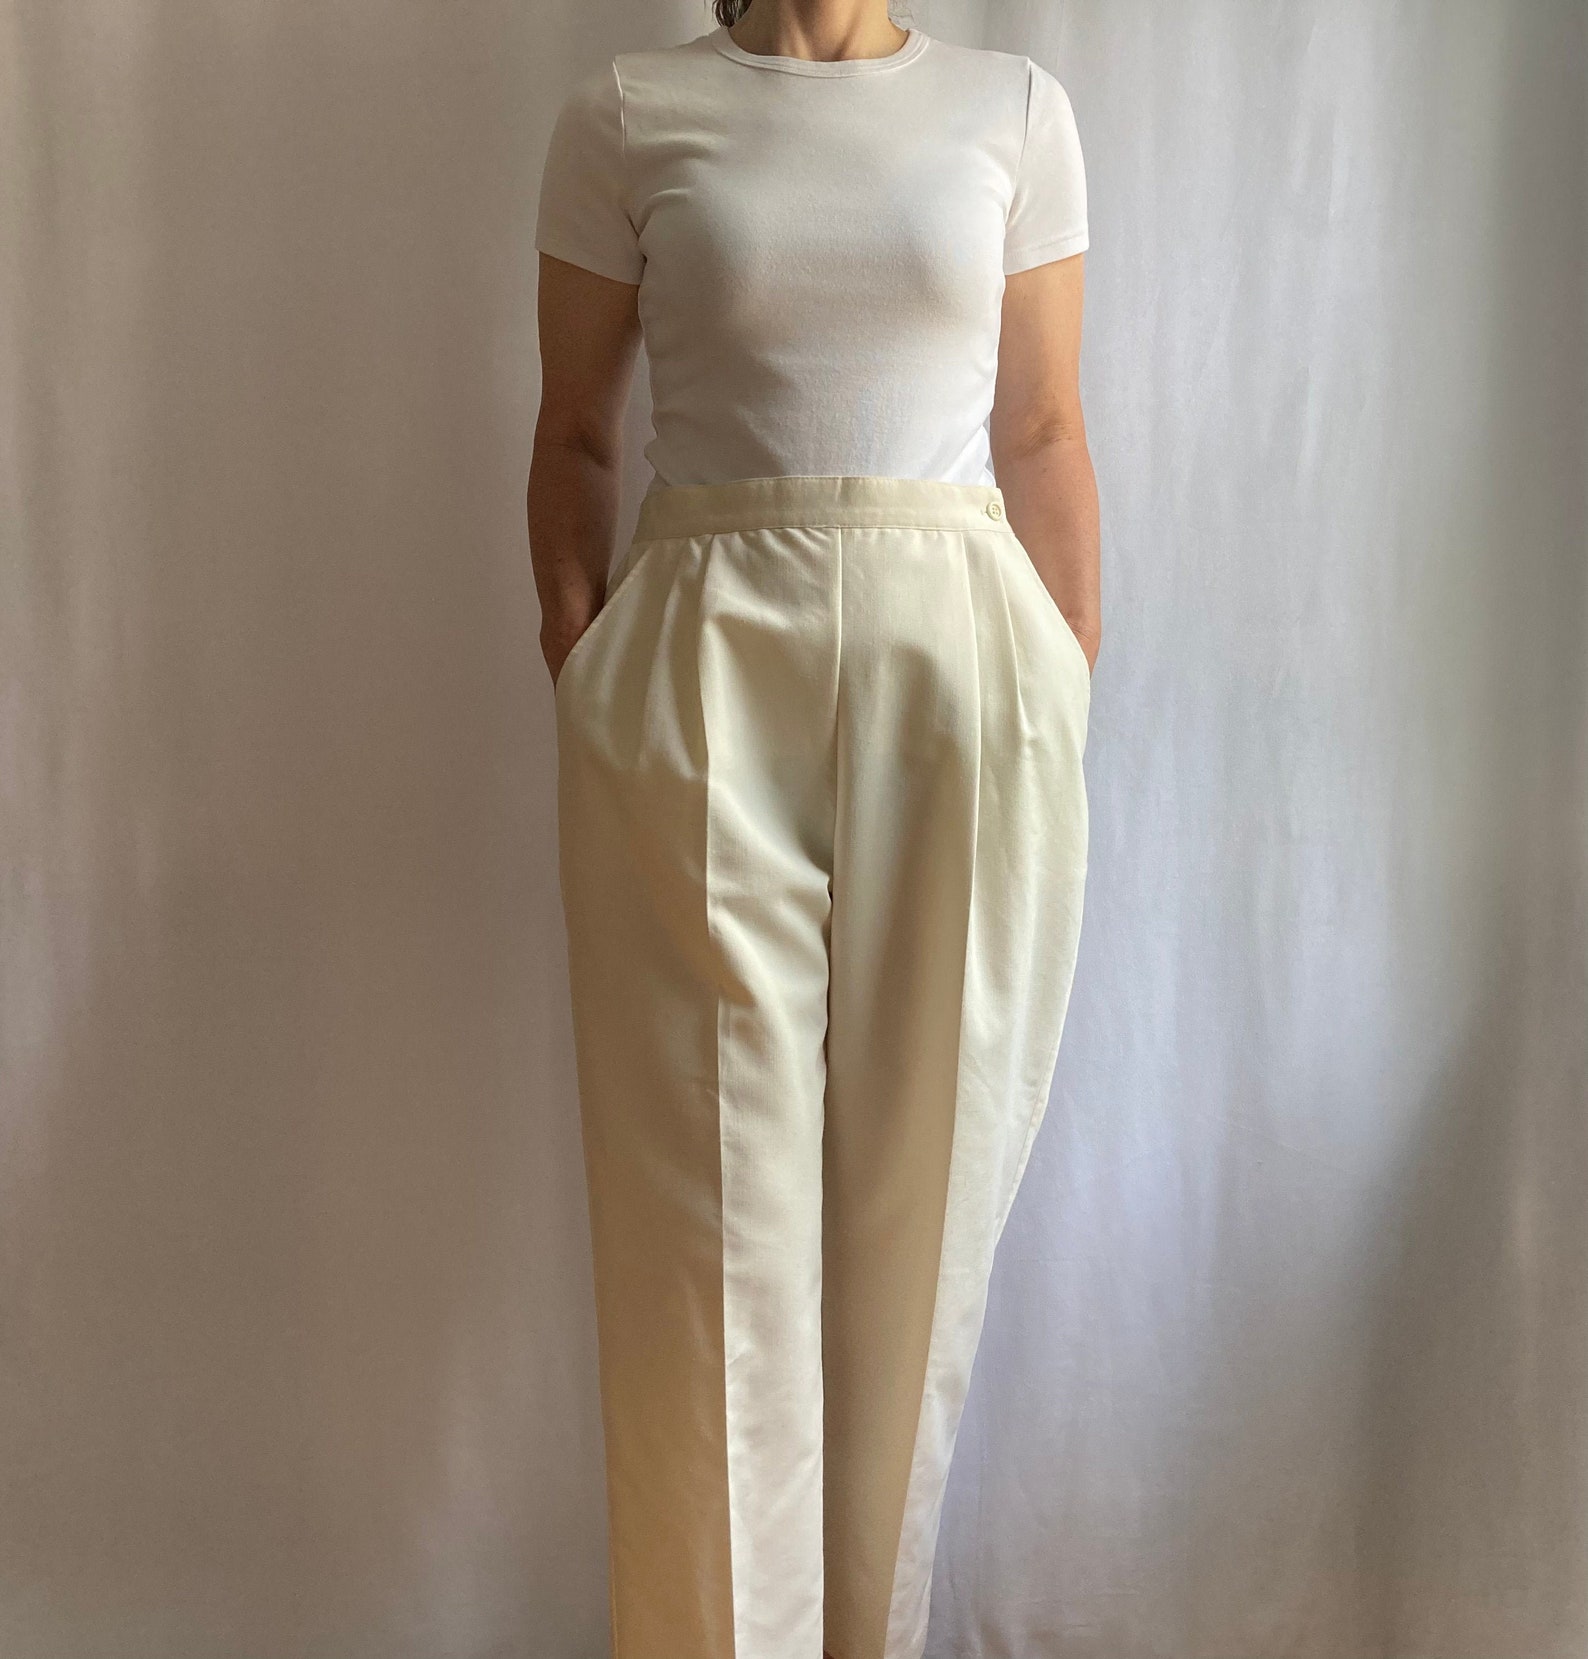 Cropped high waisted trousers vintage 90s pleated pants | Etsy